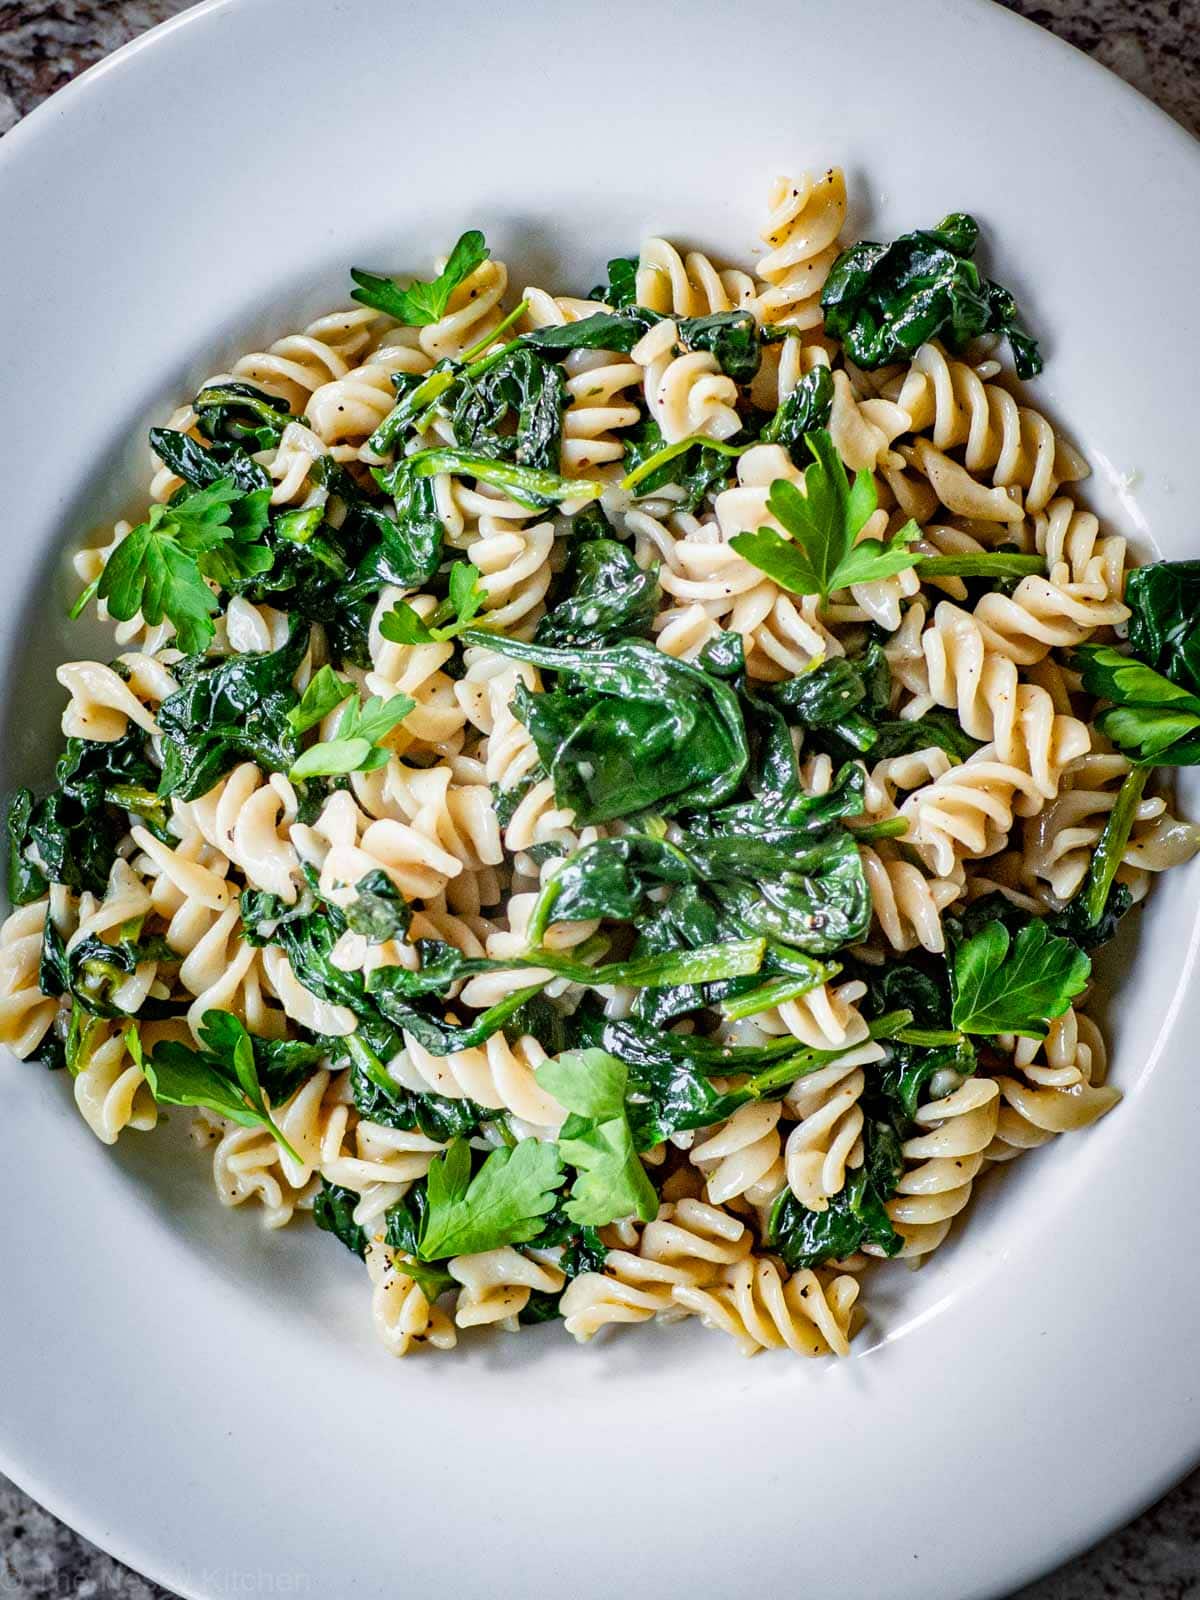 Top view of a large white bowl filled with spinach pasta and garnished with fresh parsley.